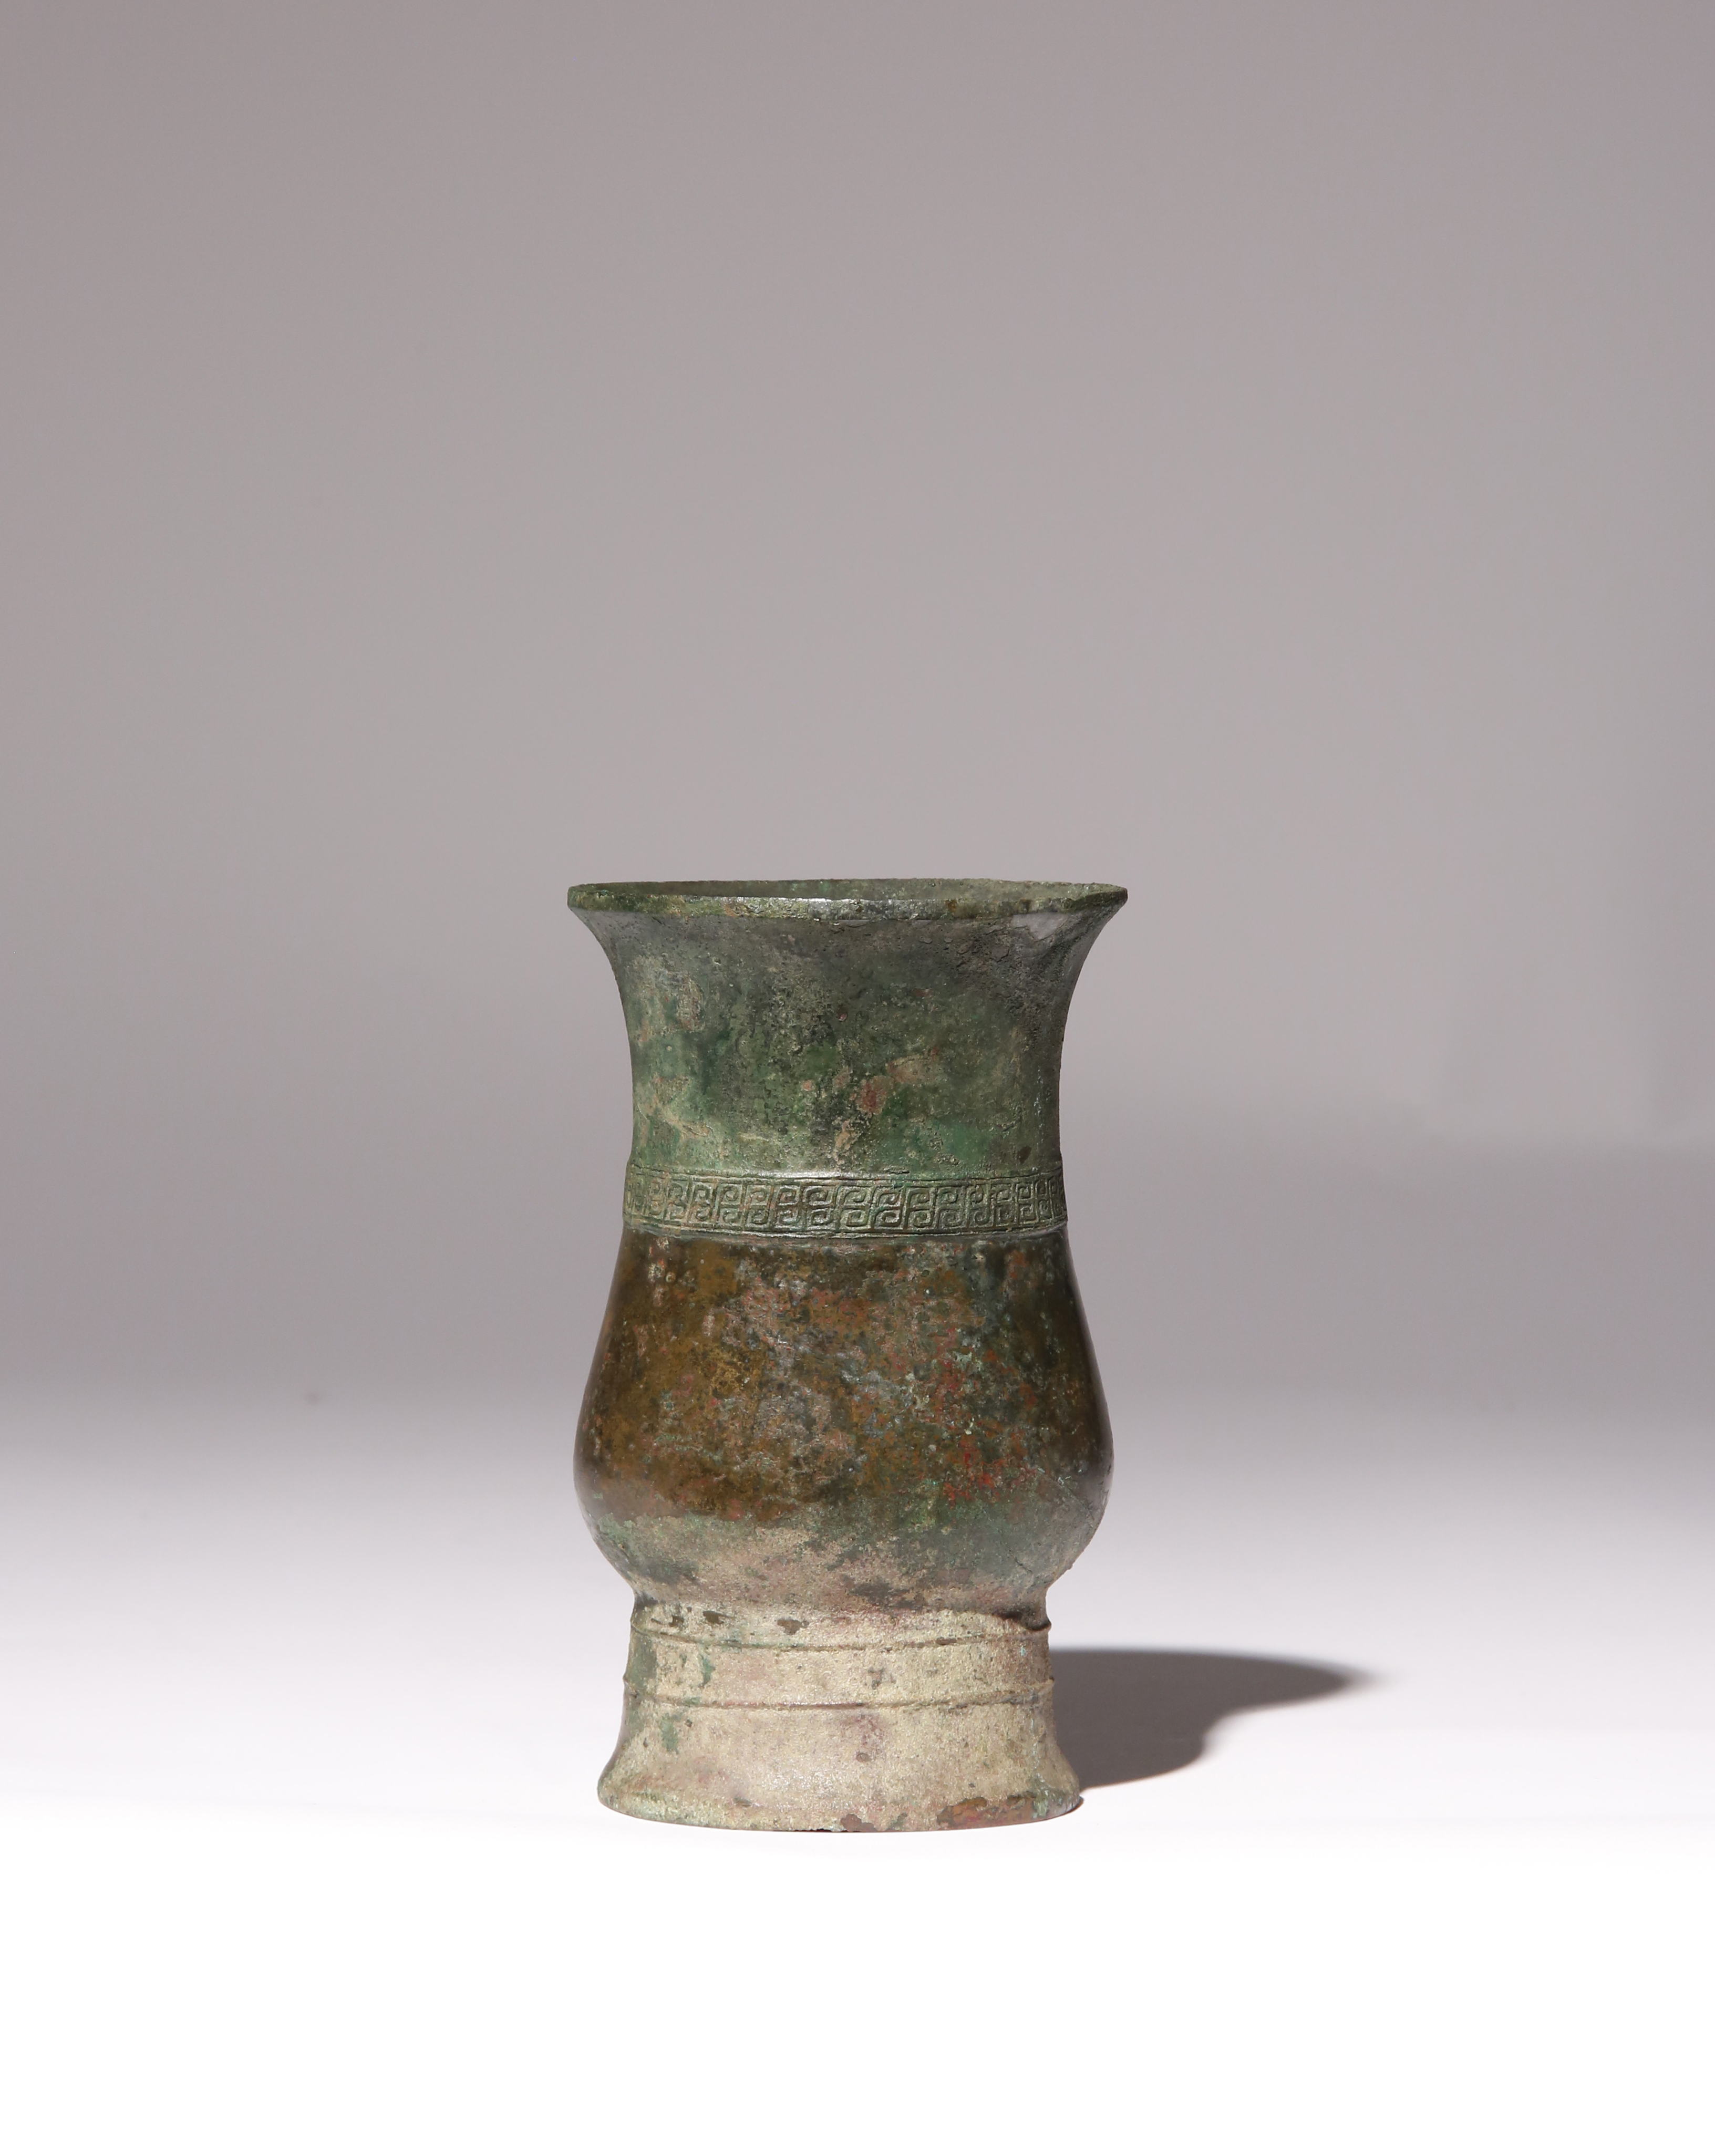 A CHINESE ARCHAIC BRONZE WINE VESSEL, ZHI SHANG DYNASTY The pear-shaped oval body cast with a band